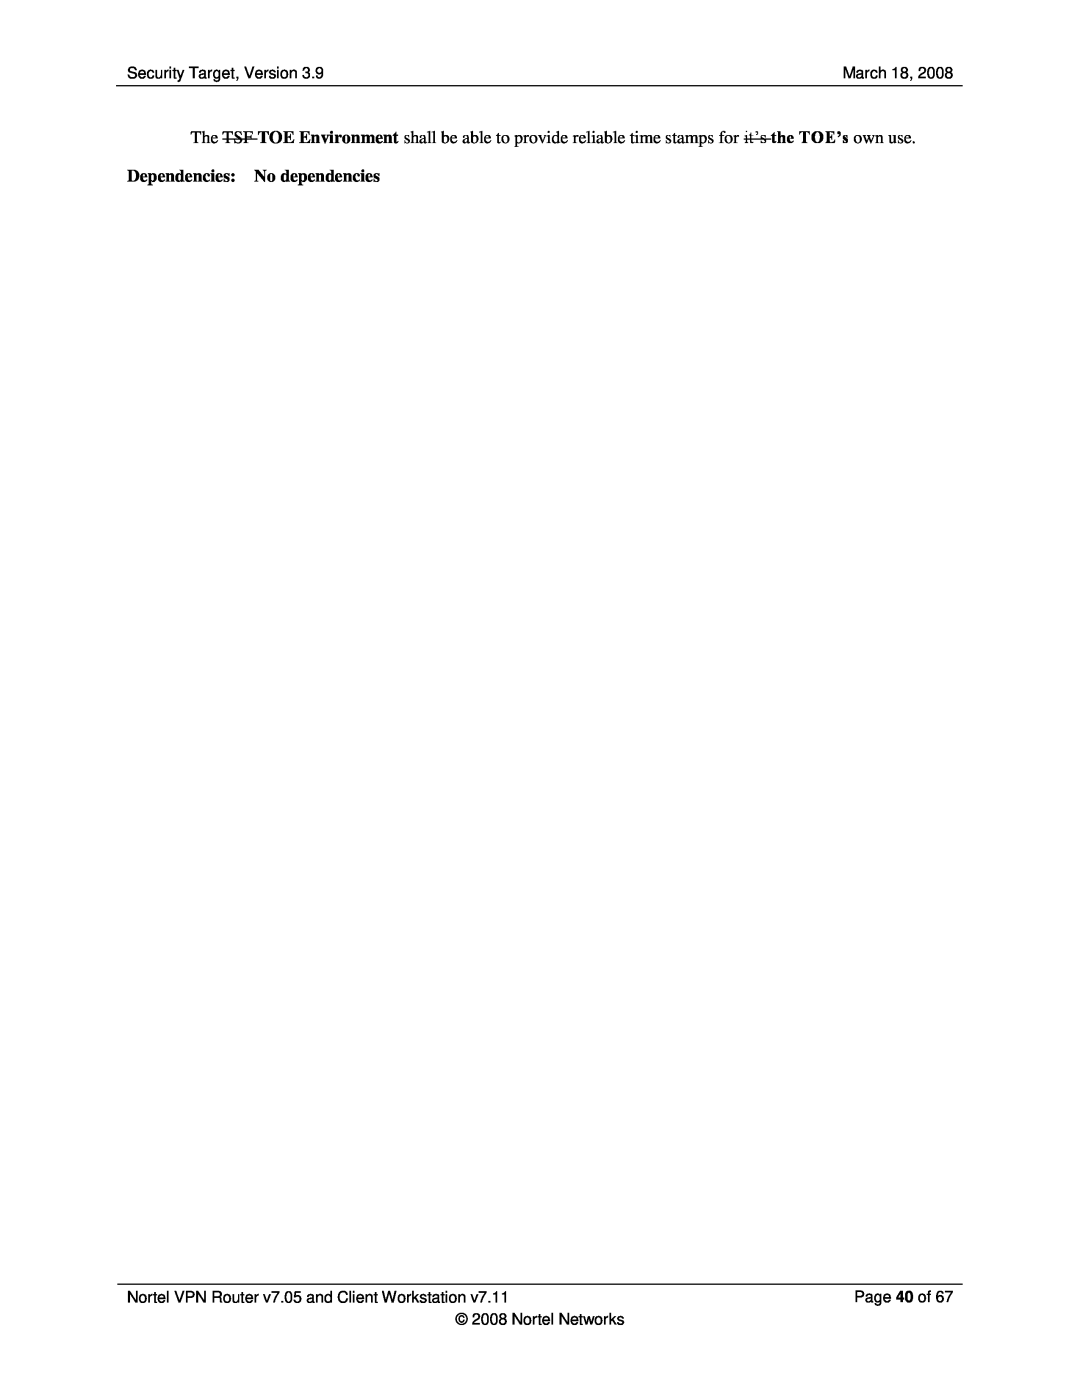 Nortel Networks 7.05, 7.11 manual Page 40 of 